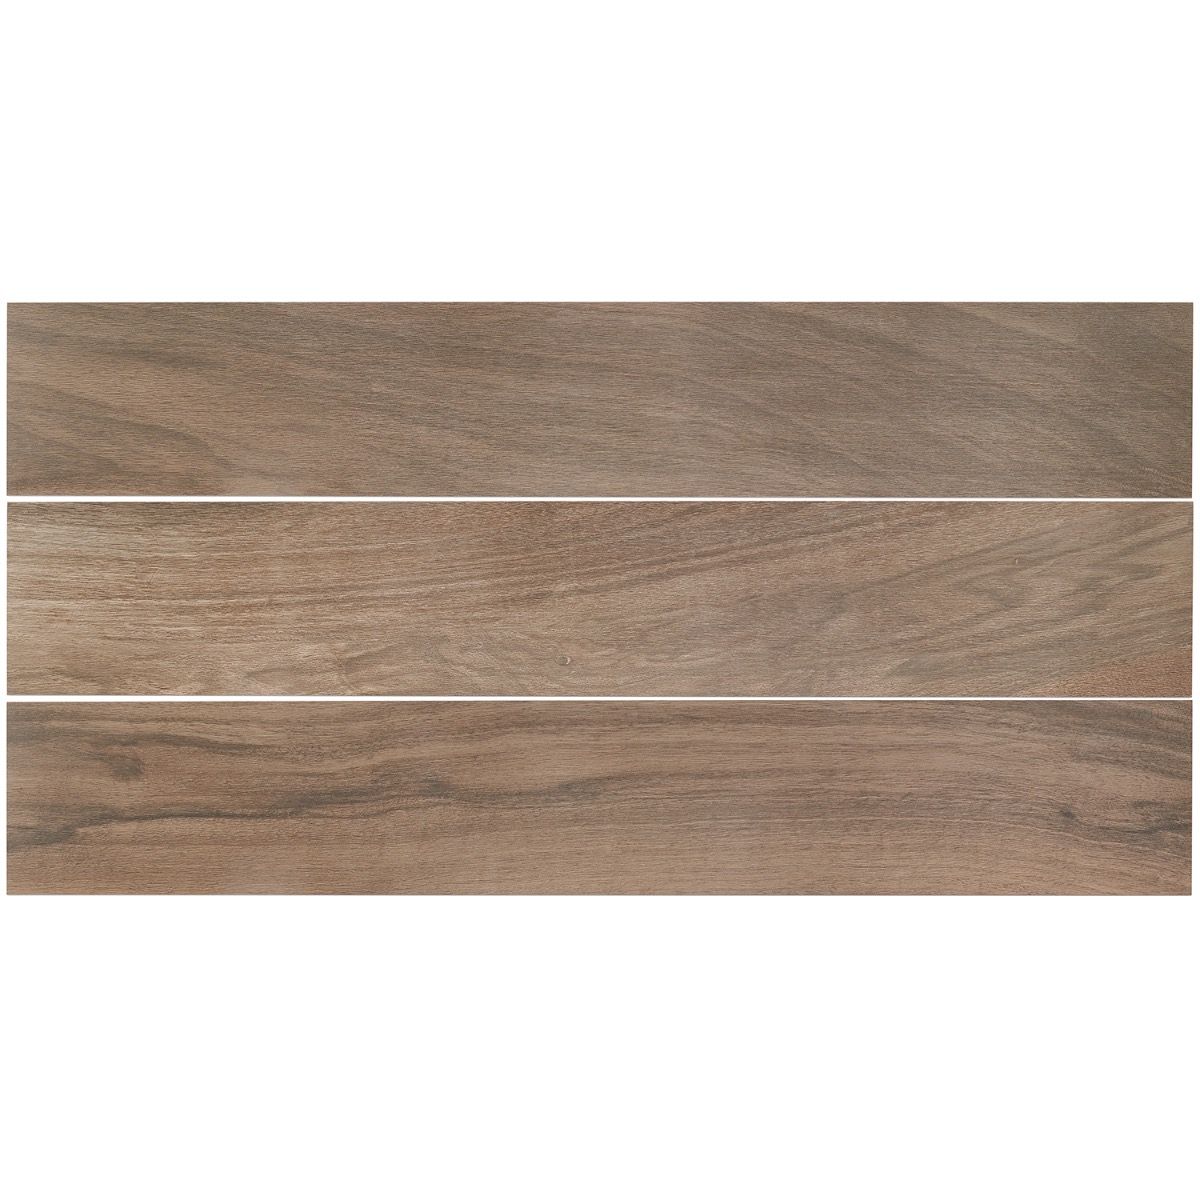 Ivy Hill Tile Mulberry 6-Pack Walnut 8-in x 48-in Matte Porcelain Wood Look Floor and Wall Tile